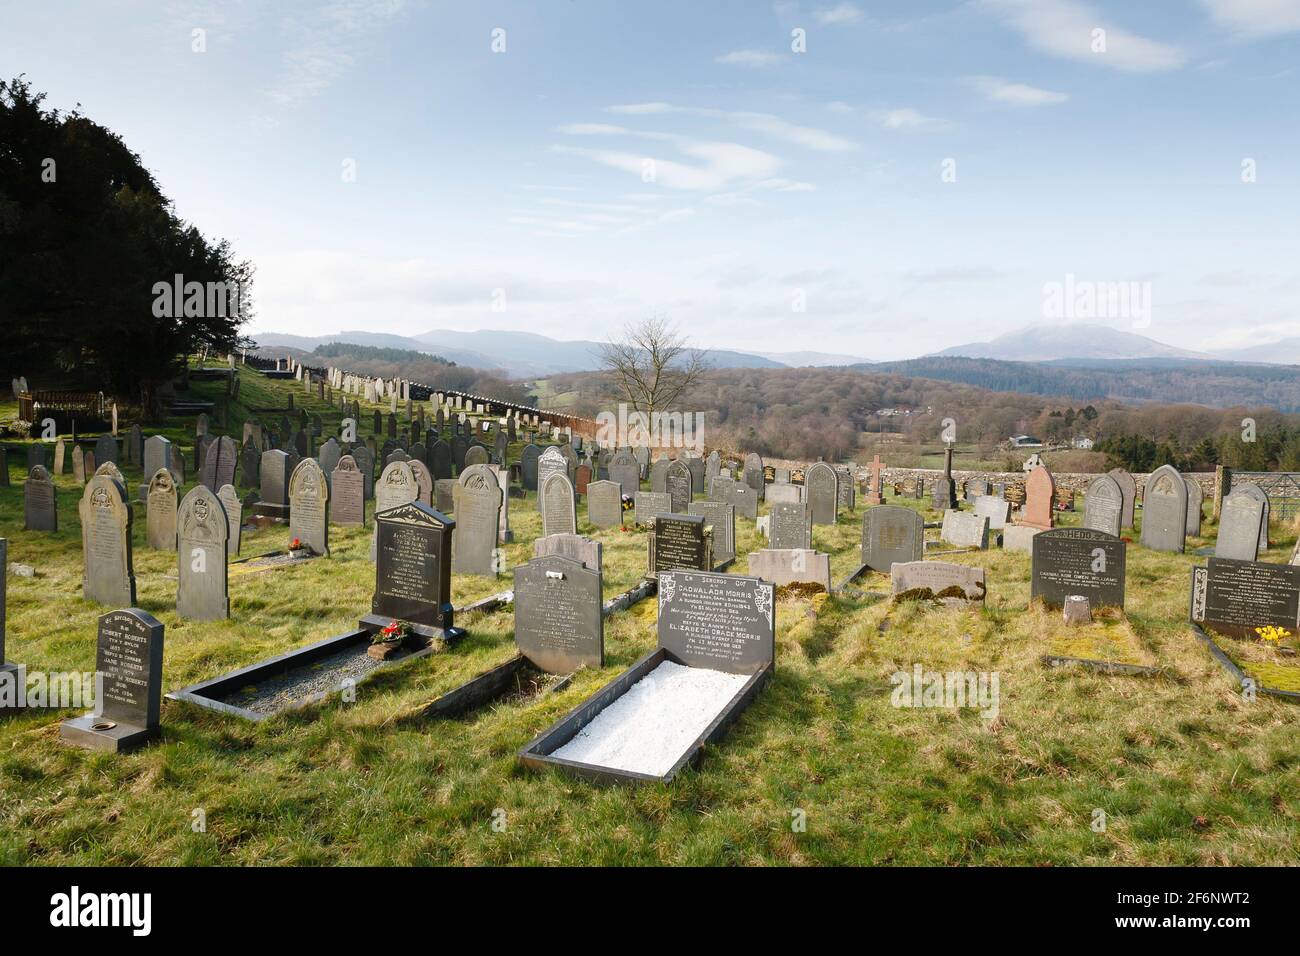 CONWY, WALES - March 02, 2012. Graves in a graveyard or cemetery in Snowdonia landscape. Capel Garmon, Wales Stock Photo